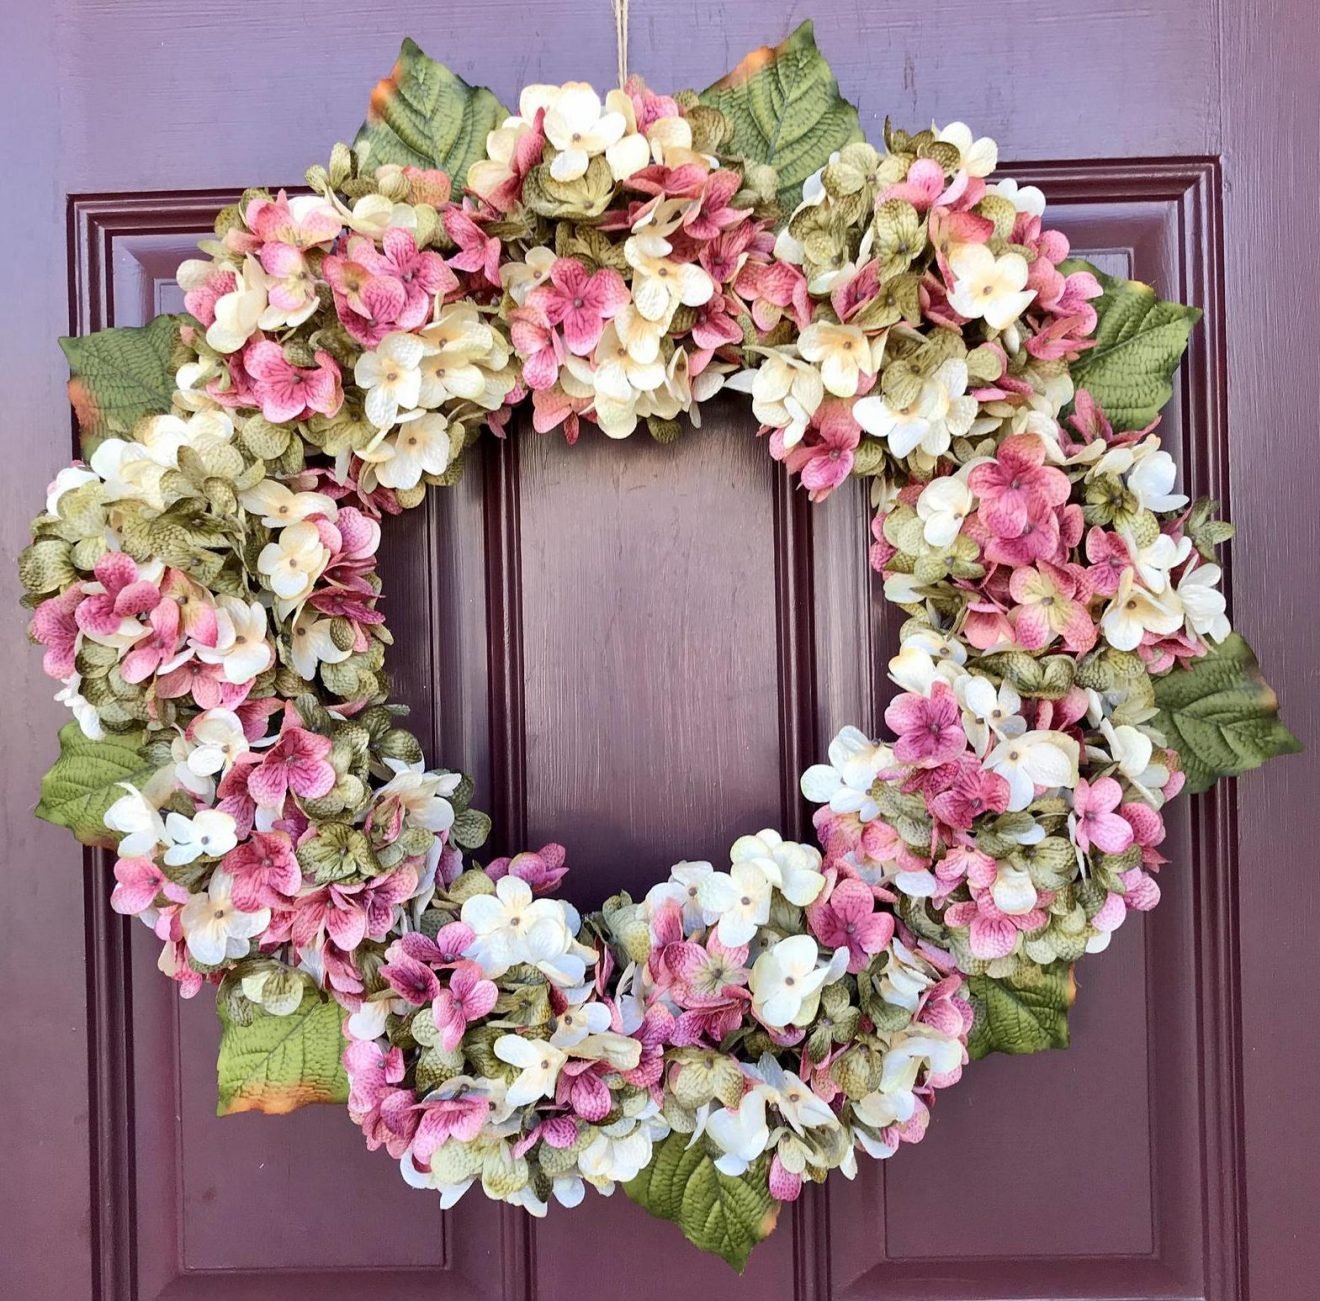 Wuxi Chuannan Artificial Green Wreath Farmhouse Wreath,Front Door Wreath for Floral Home Wall Decor,Mothers Day